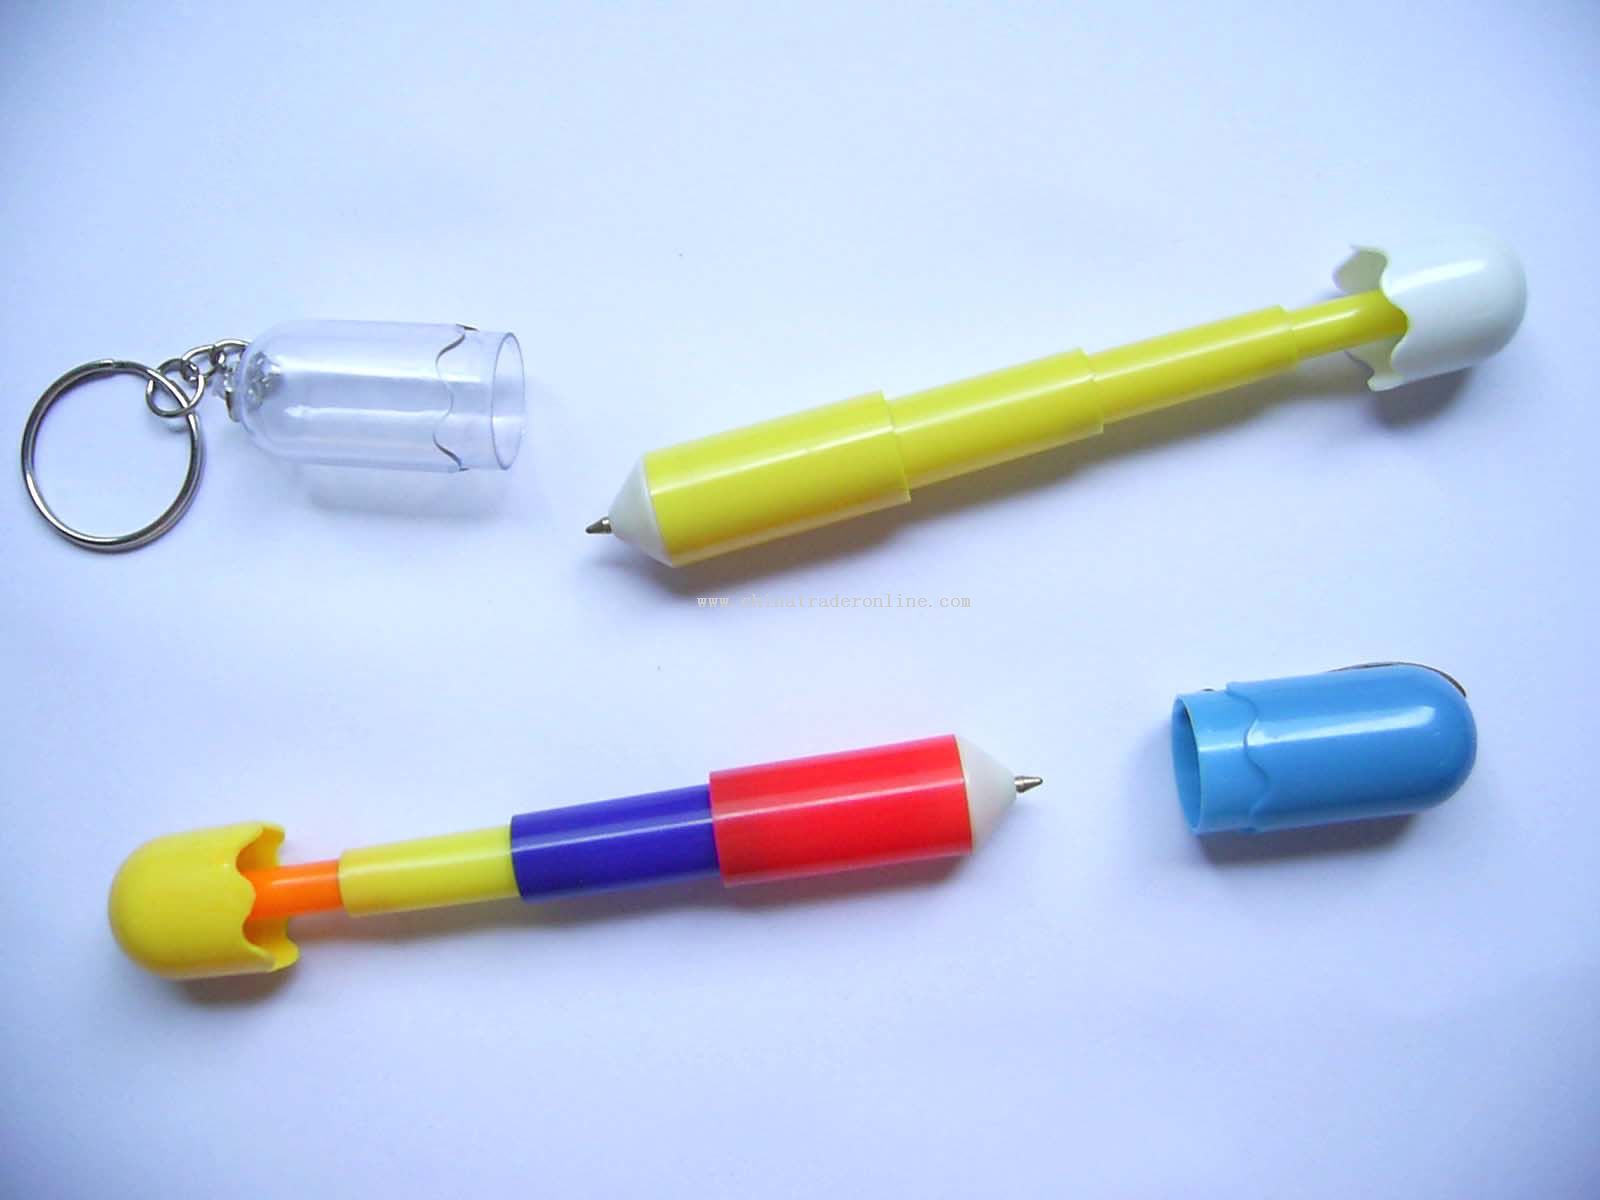 Pill shaped pen with keychain or clamp from China